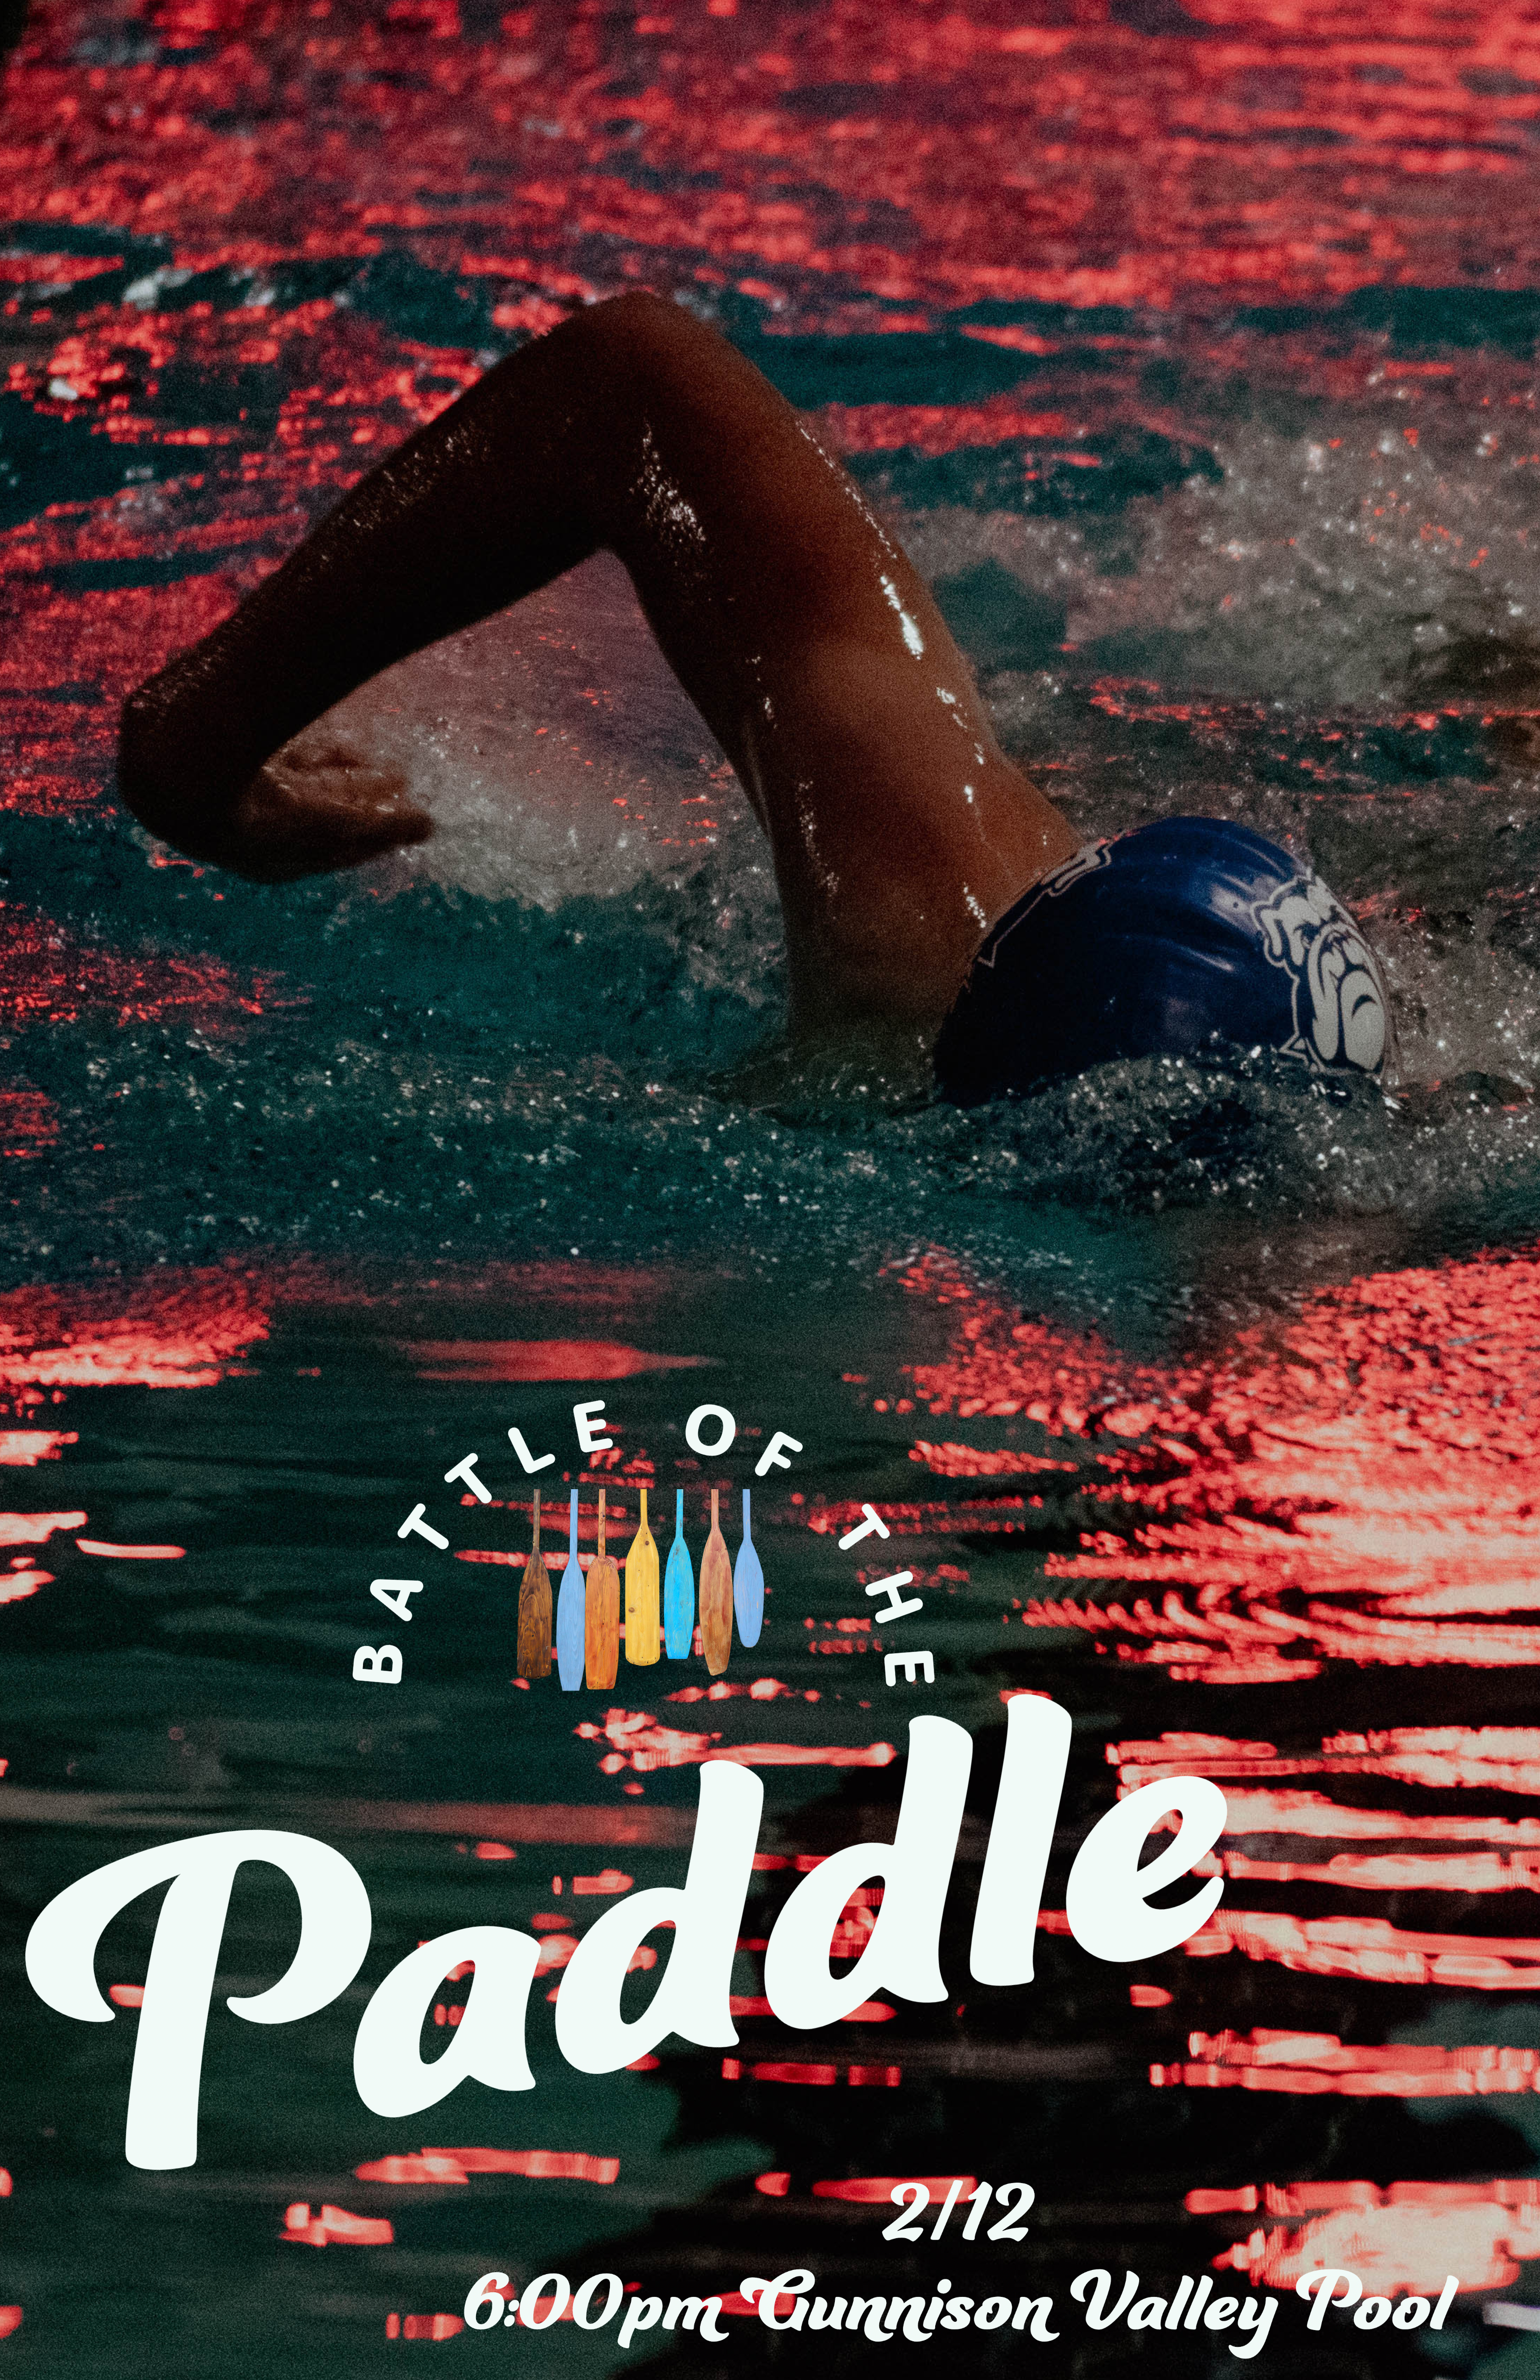 Battle for the Paddle